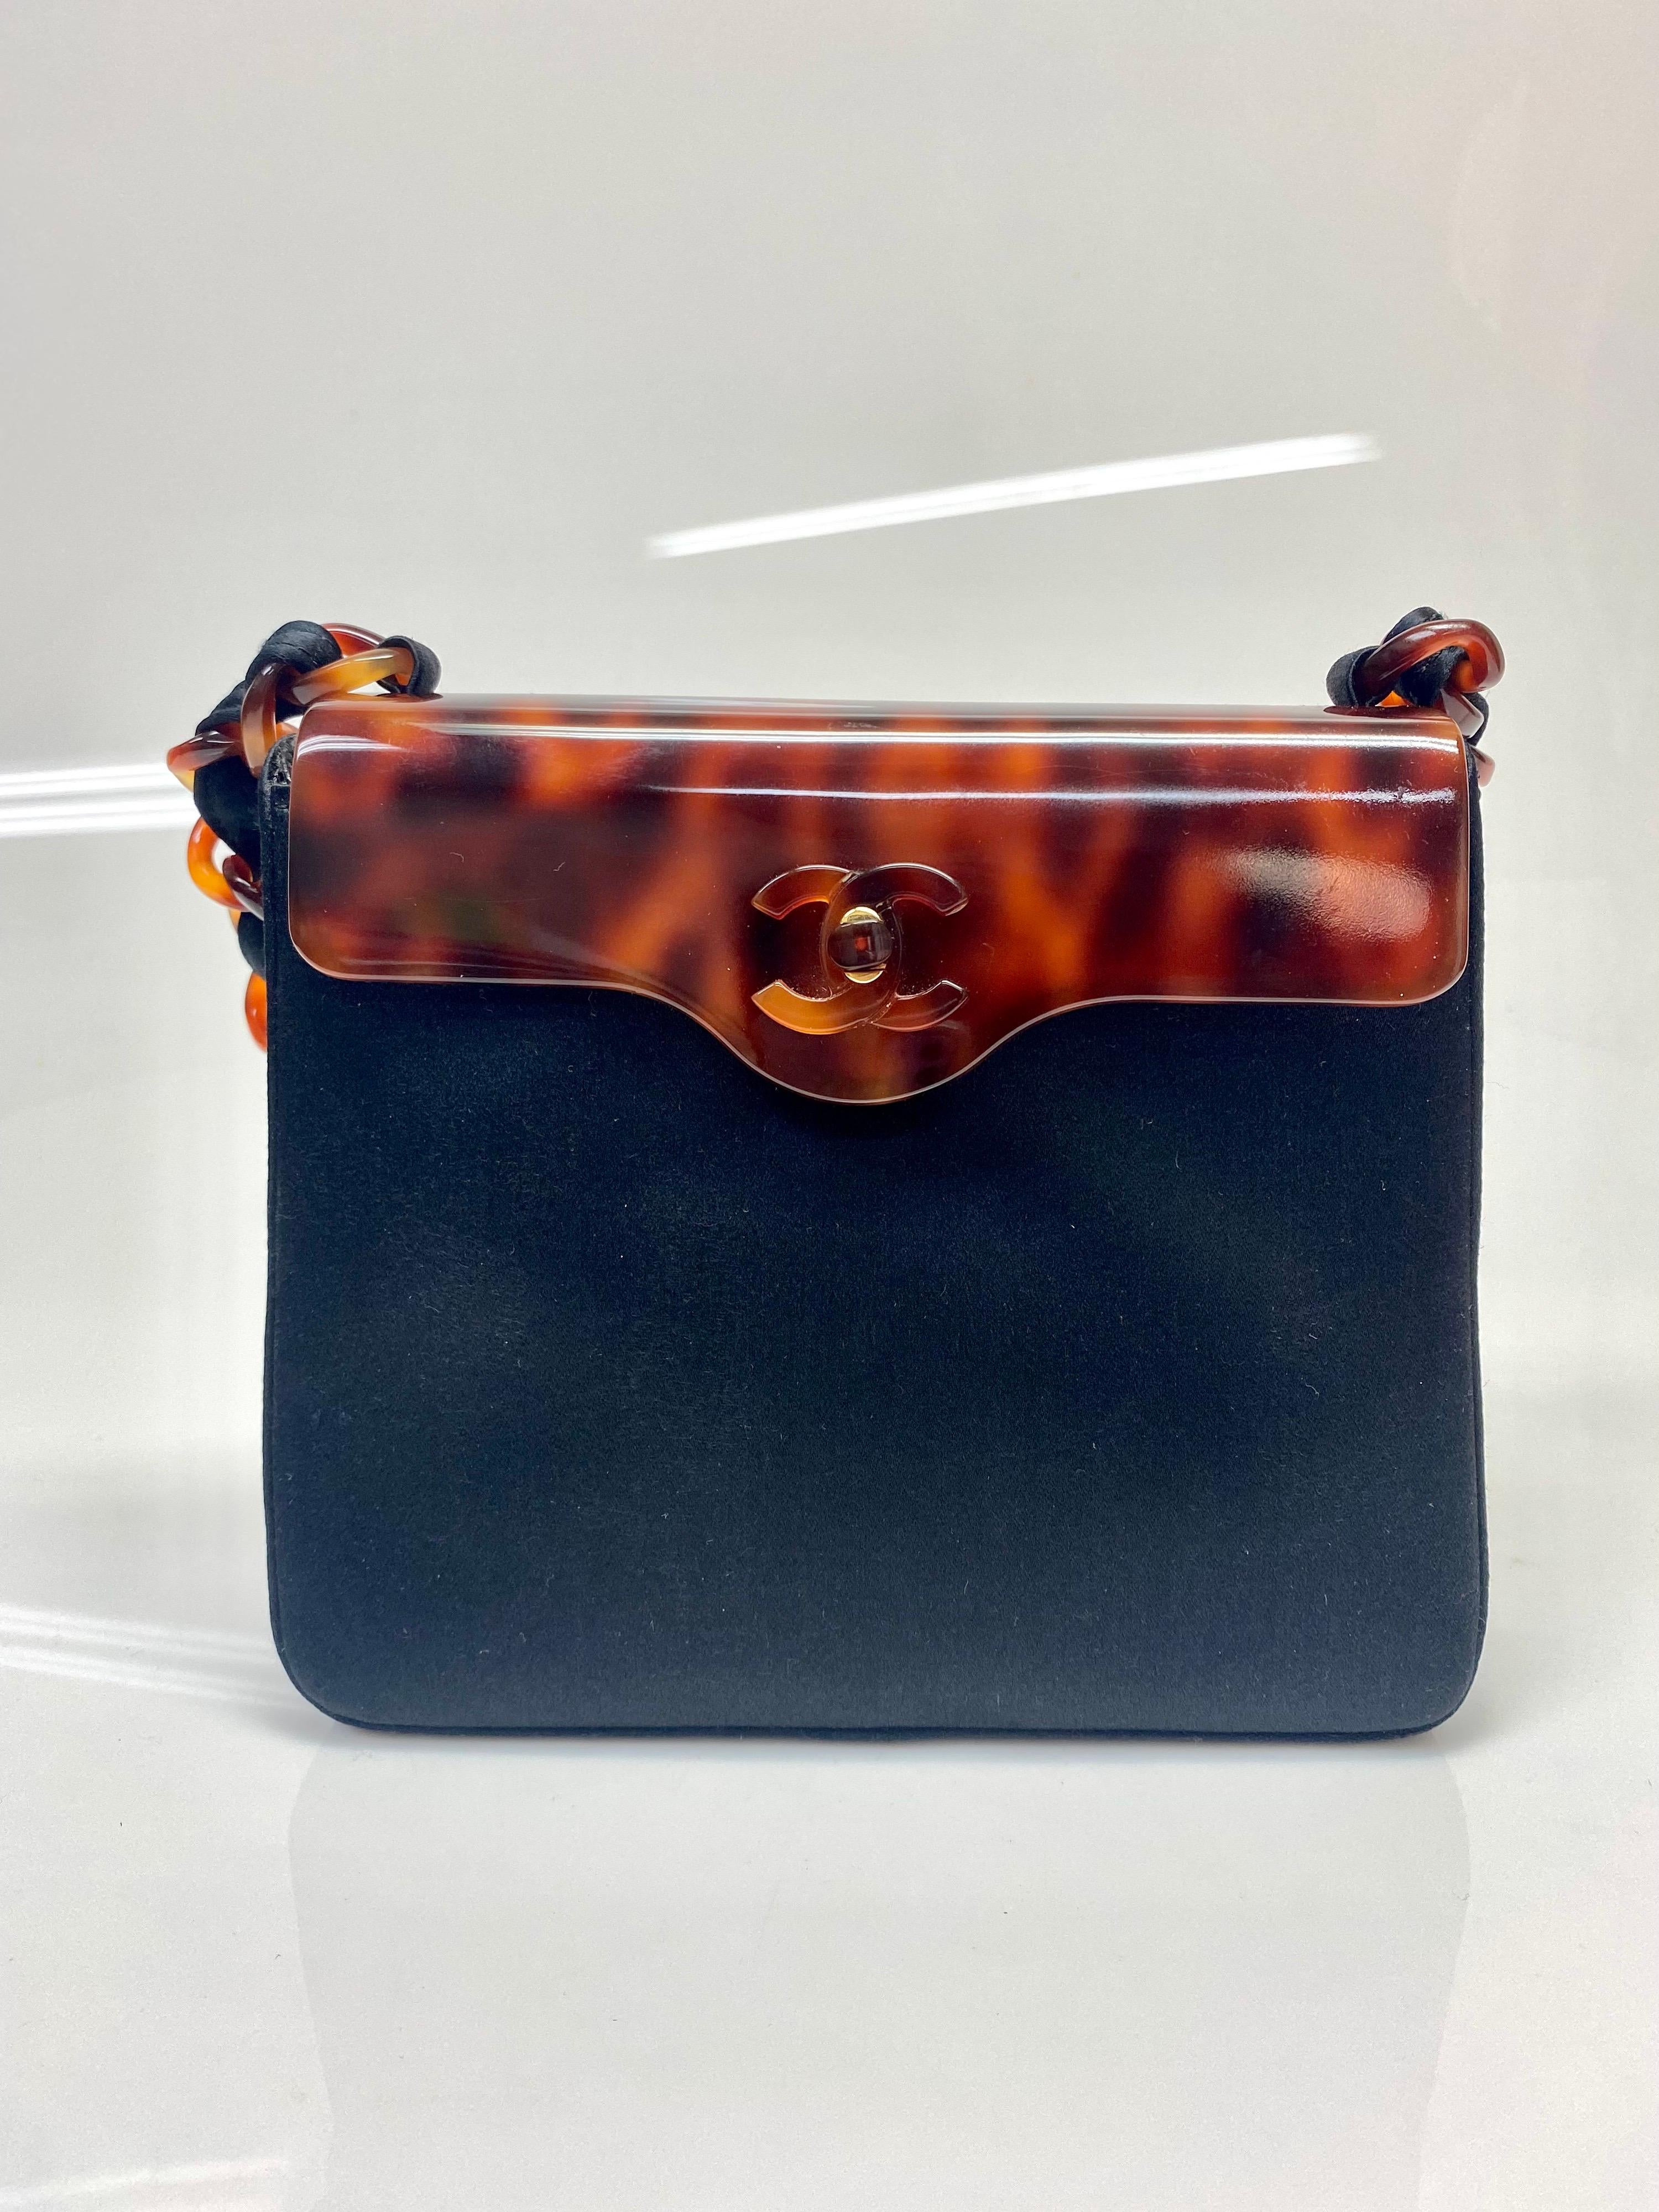 This authentic Chanel black silk tortoiseshell detail evening bag is a rare and stunning addition for any collection.  The bag features the iconic CC logo, and a magnetic opening. The strap is linked detailing with black silk and tortoiseshell woven